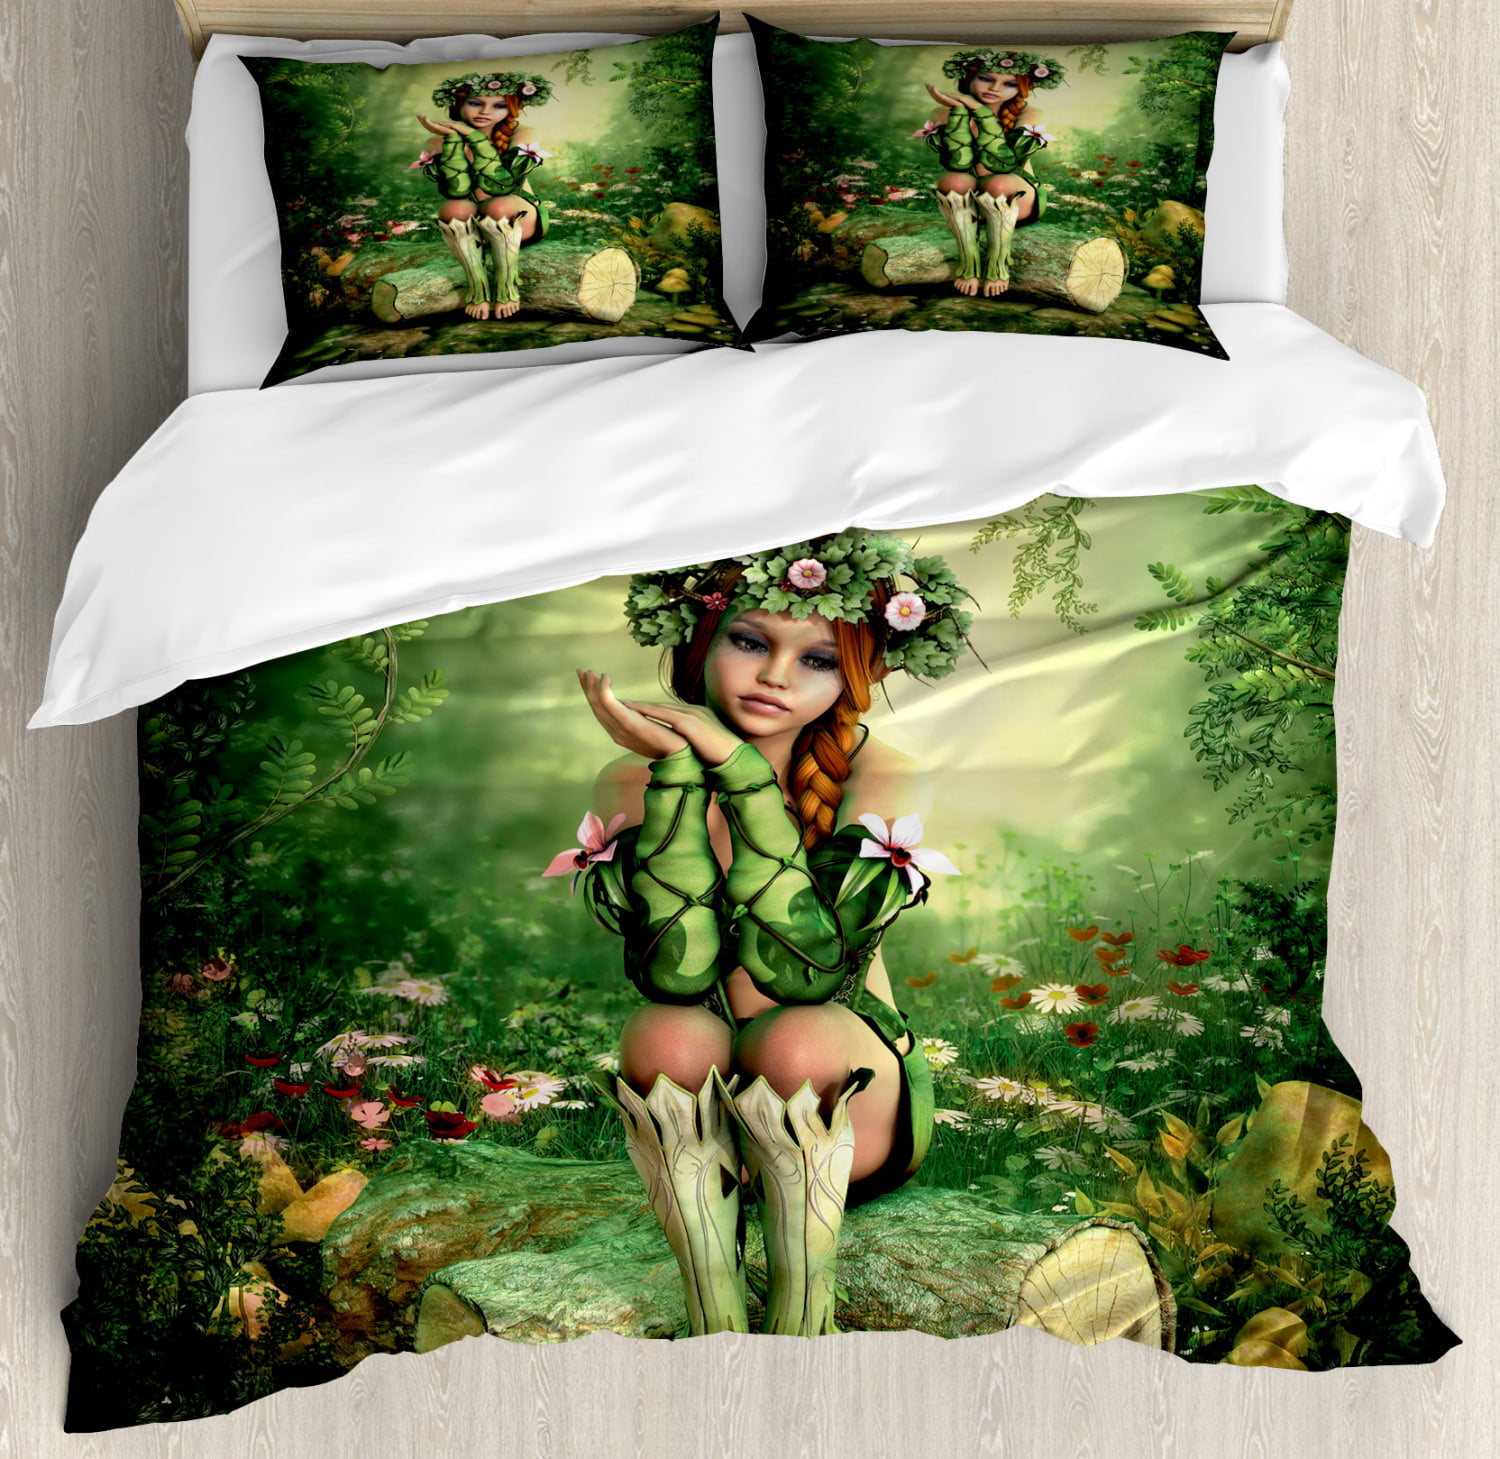 Fairy Duvet Cover Set King Size, Computer Art Elf Girl with Wreath on ...